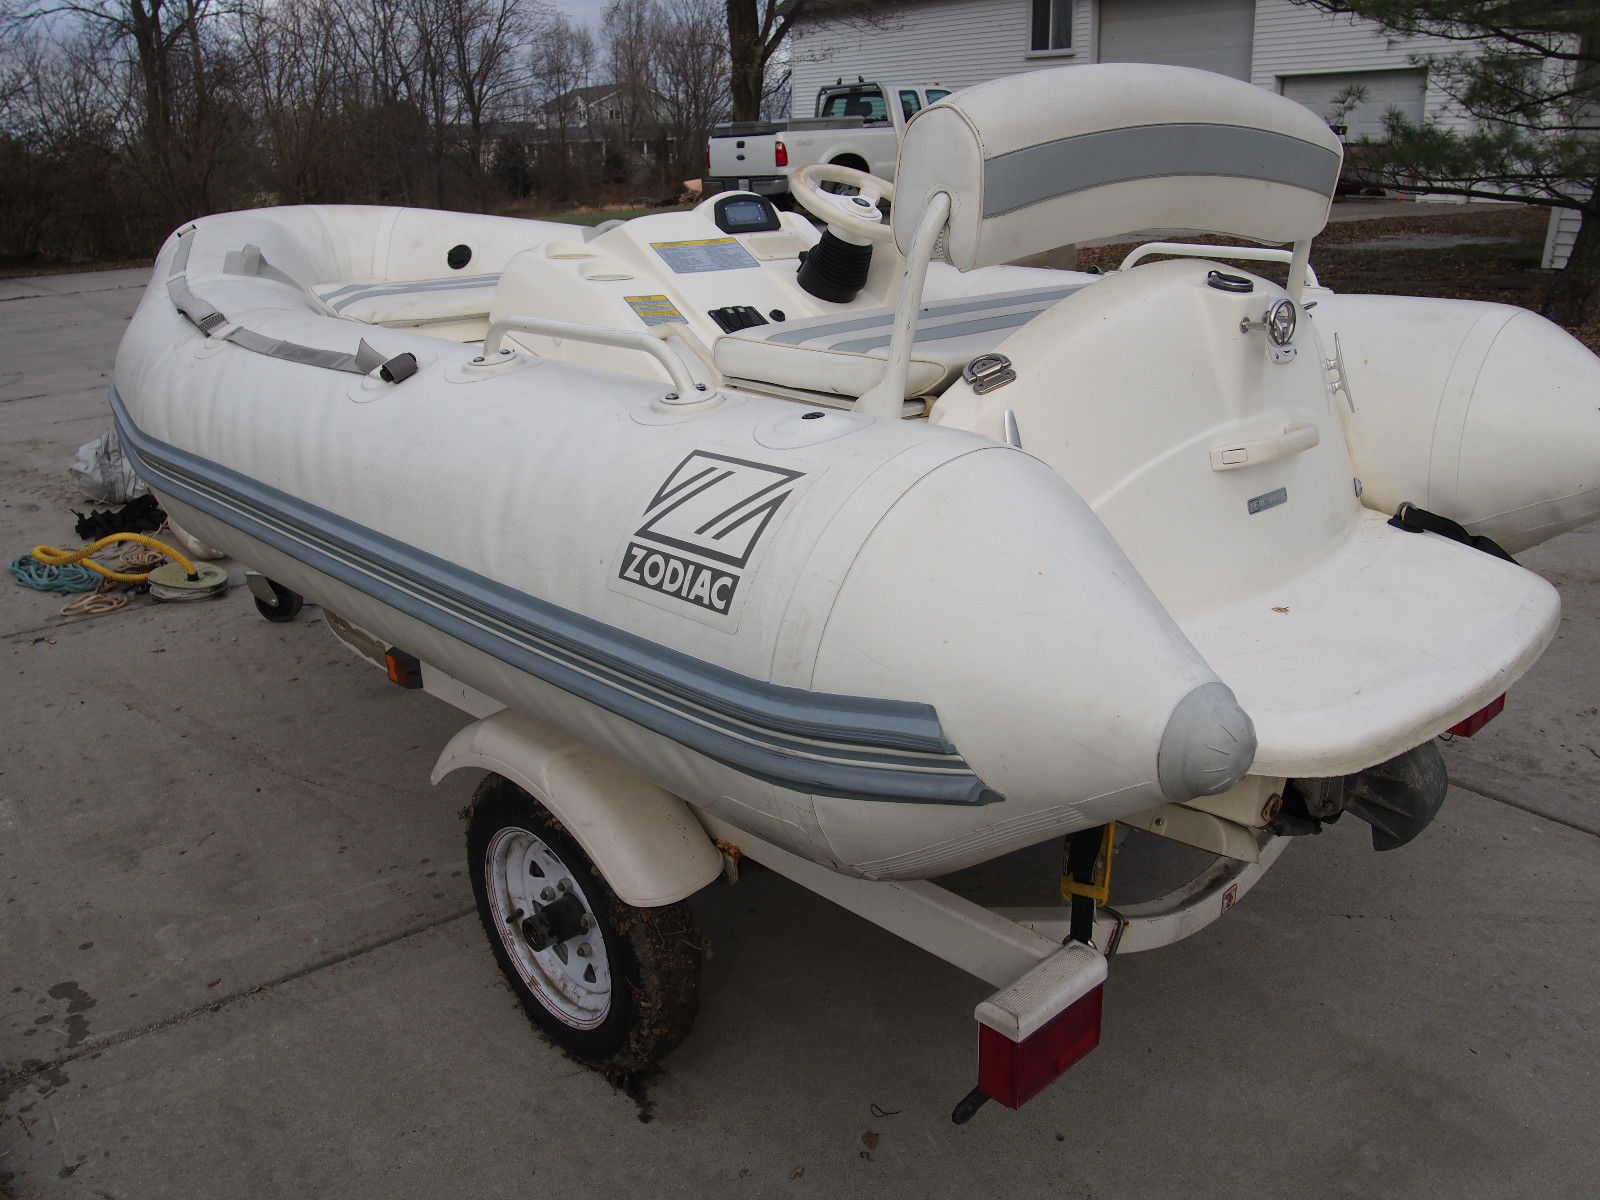 Zodiac Pro Jet 350 2000 for sale for $5,900 - Boats-from 